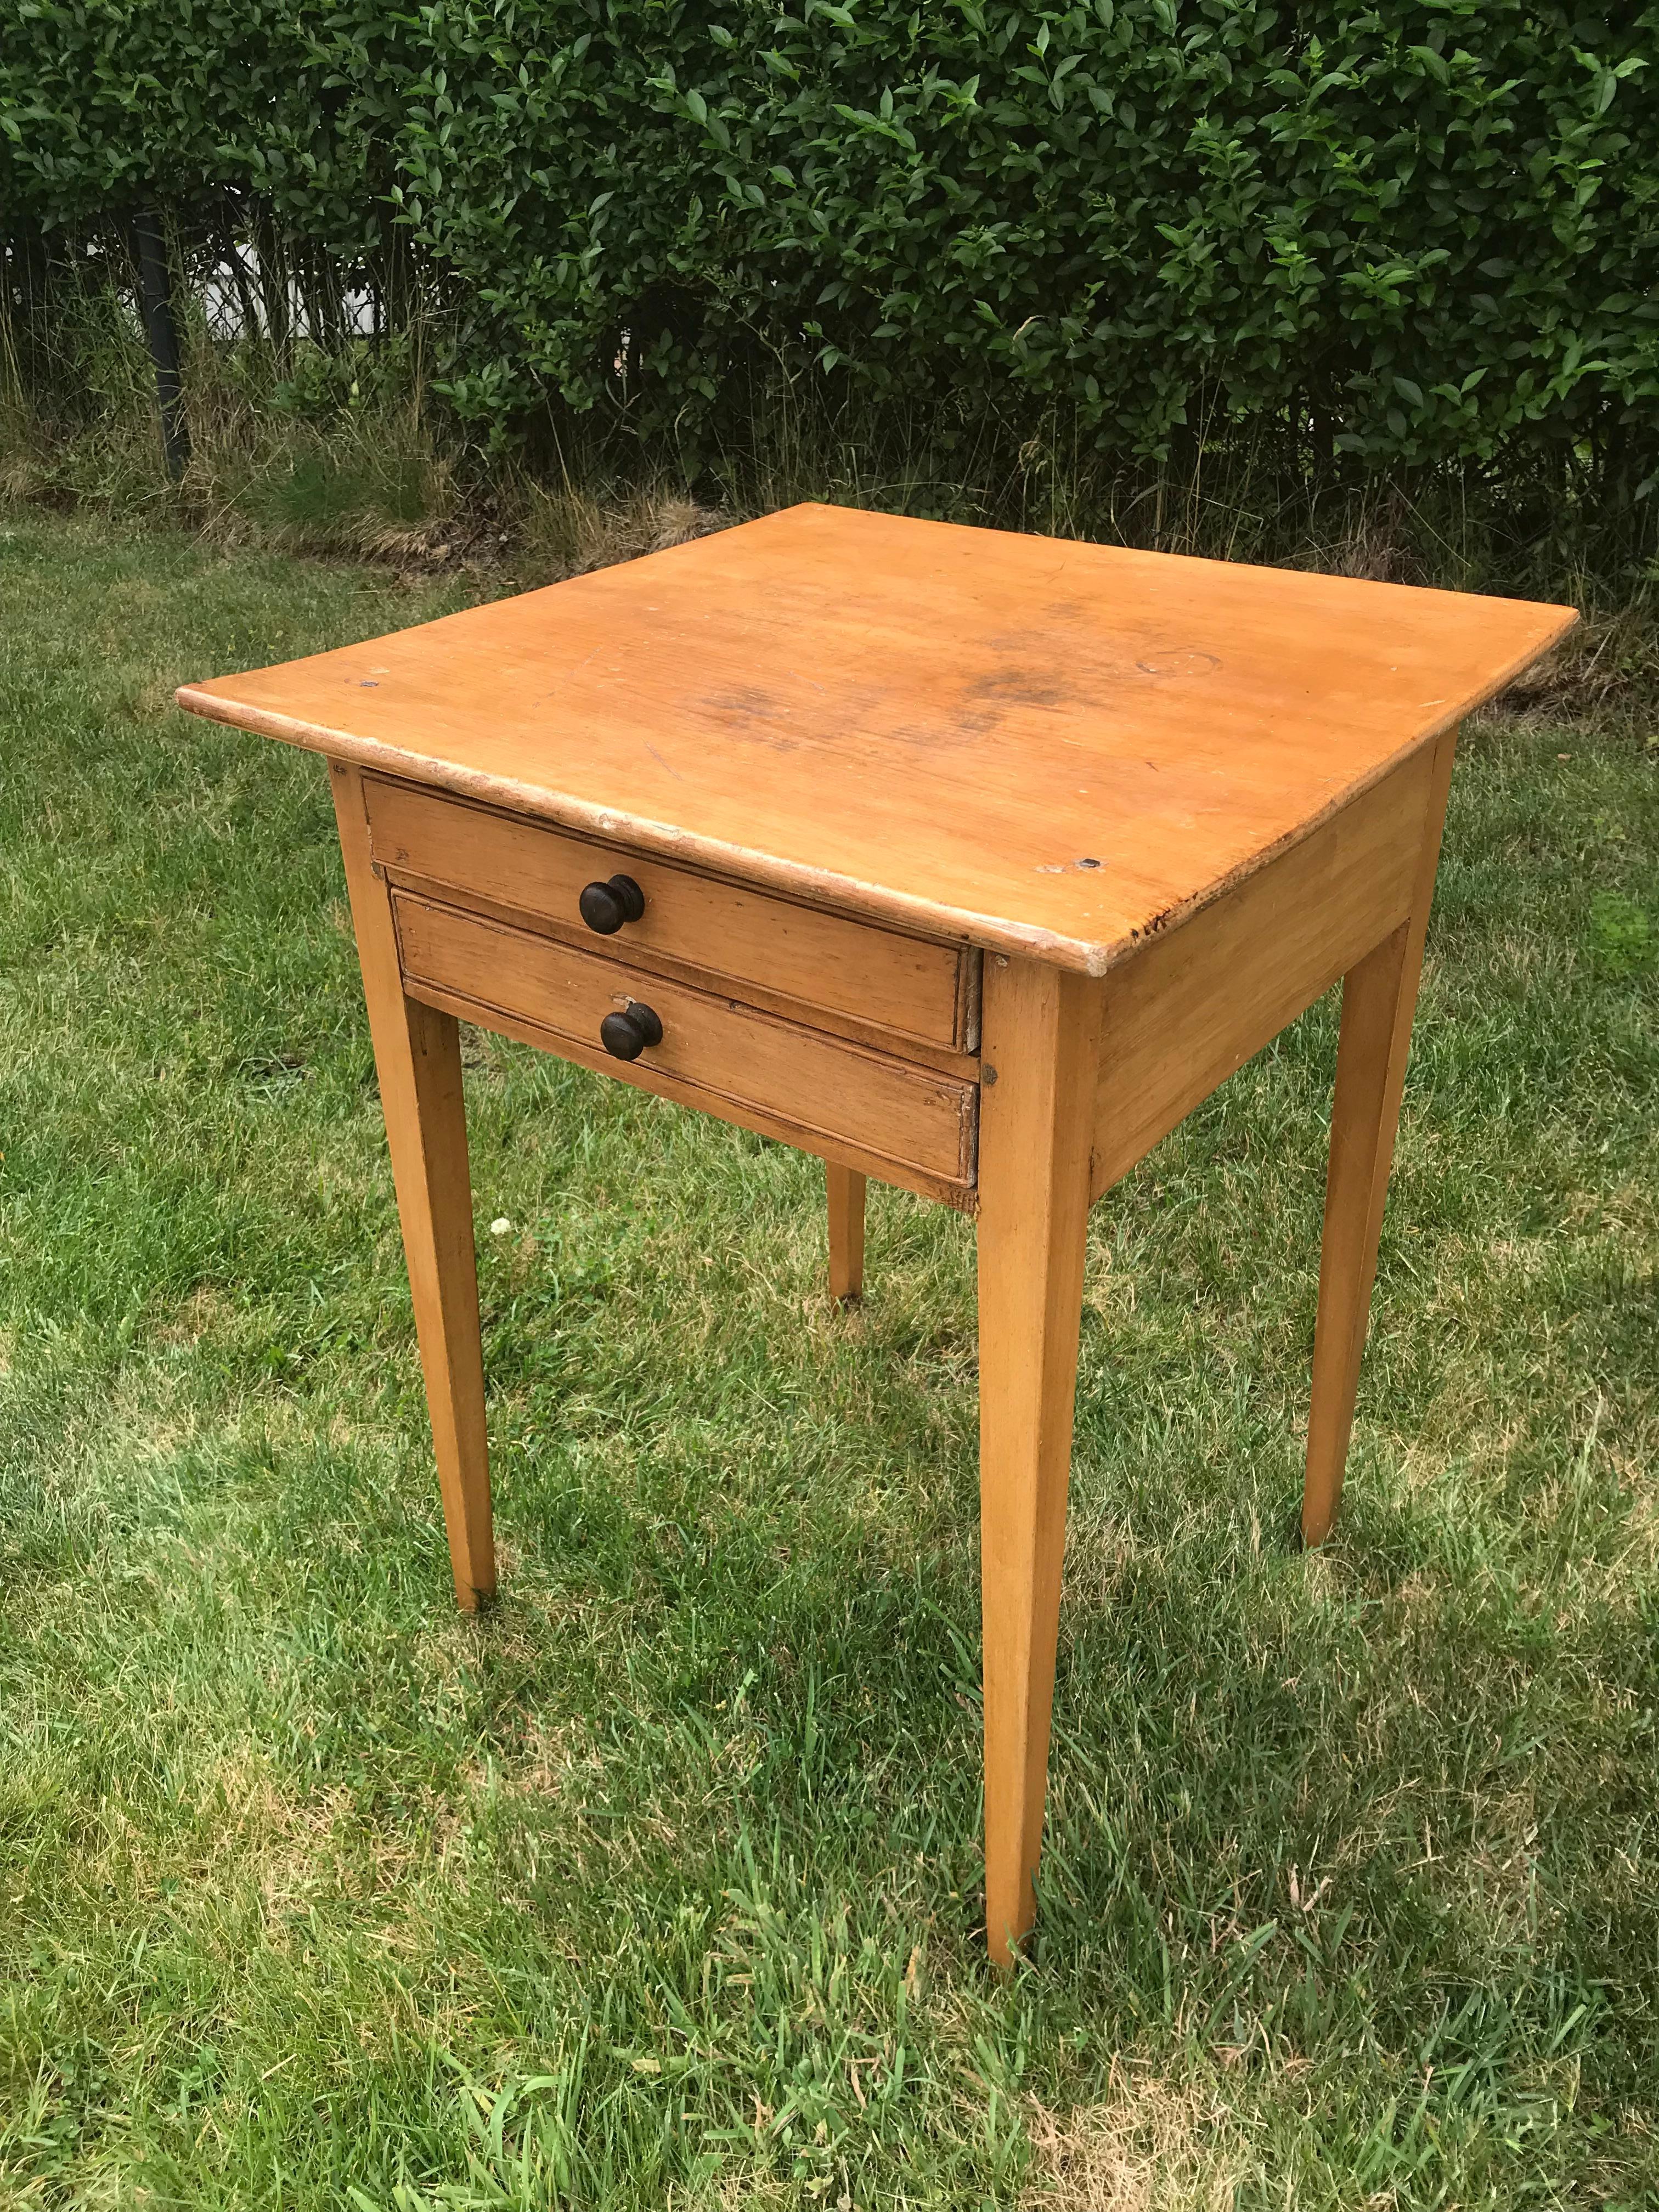 Wood side table, two drawers with dark knobs.